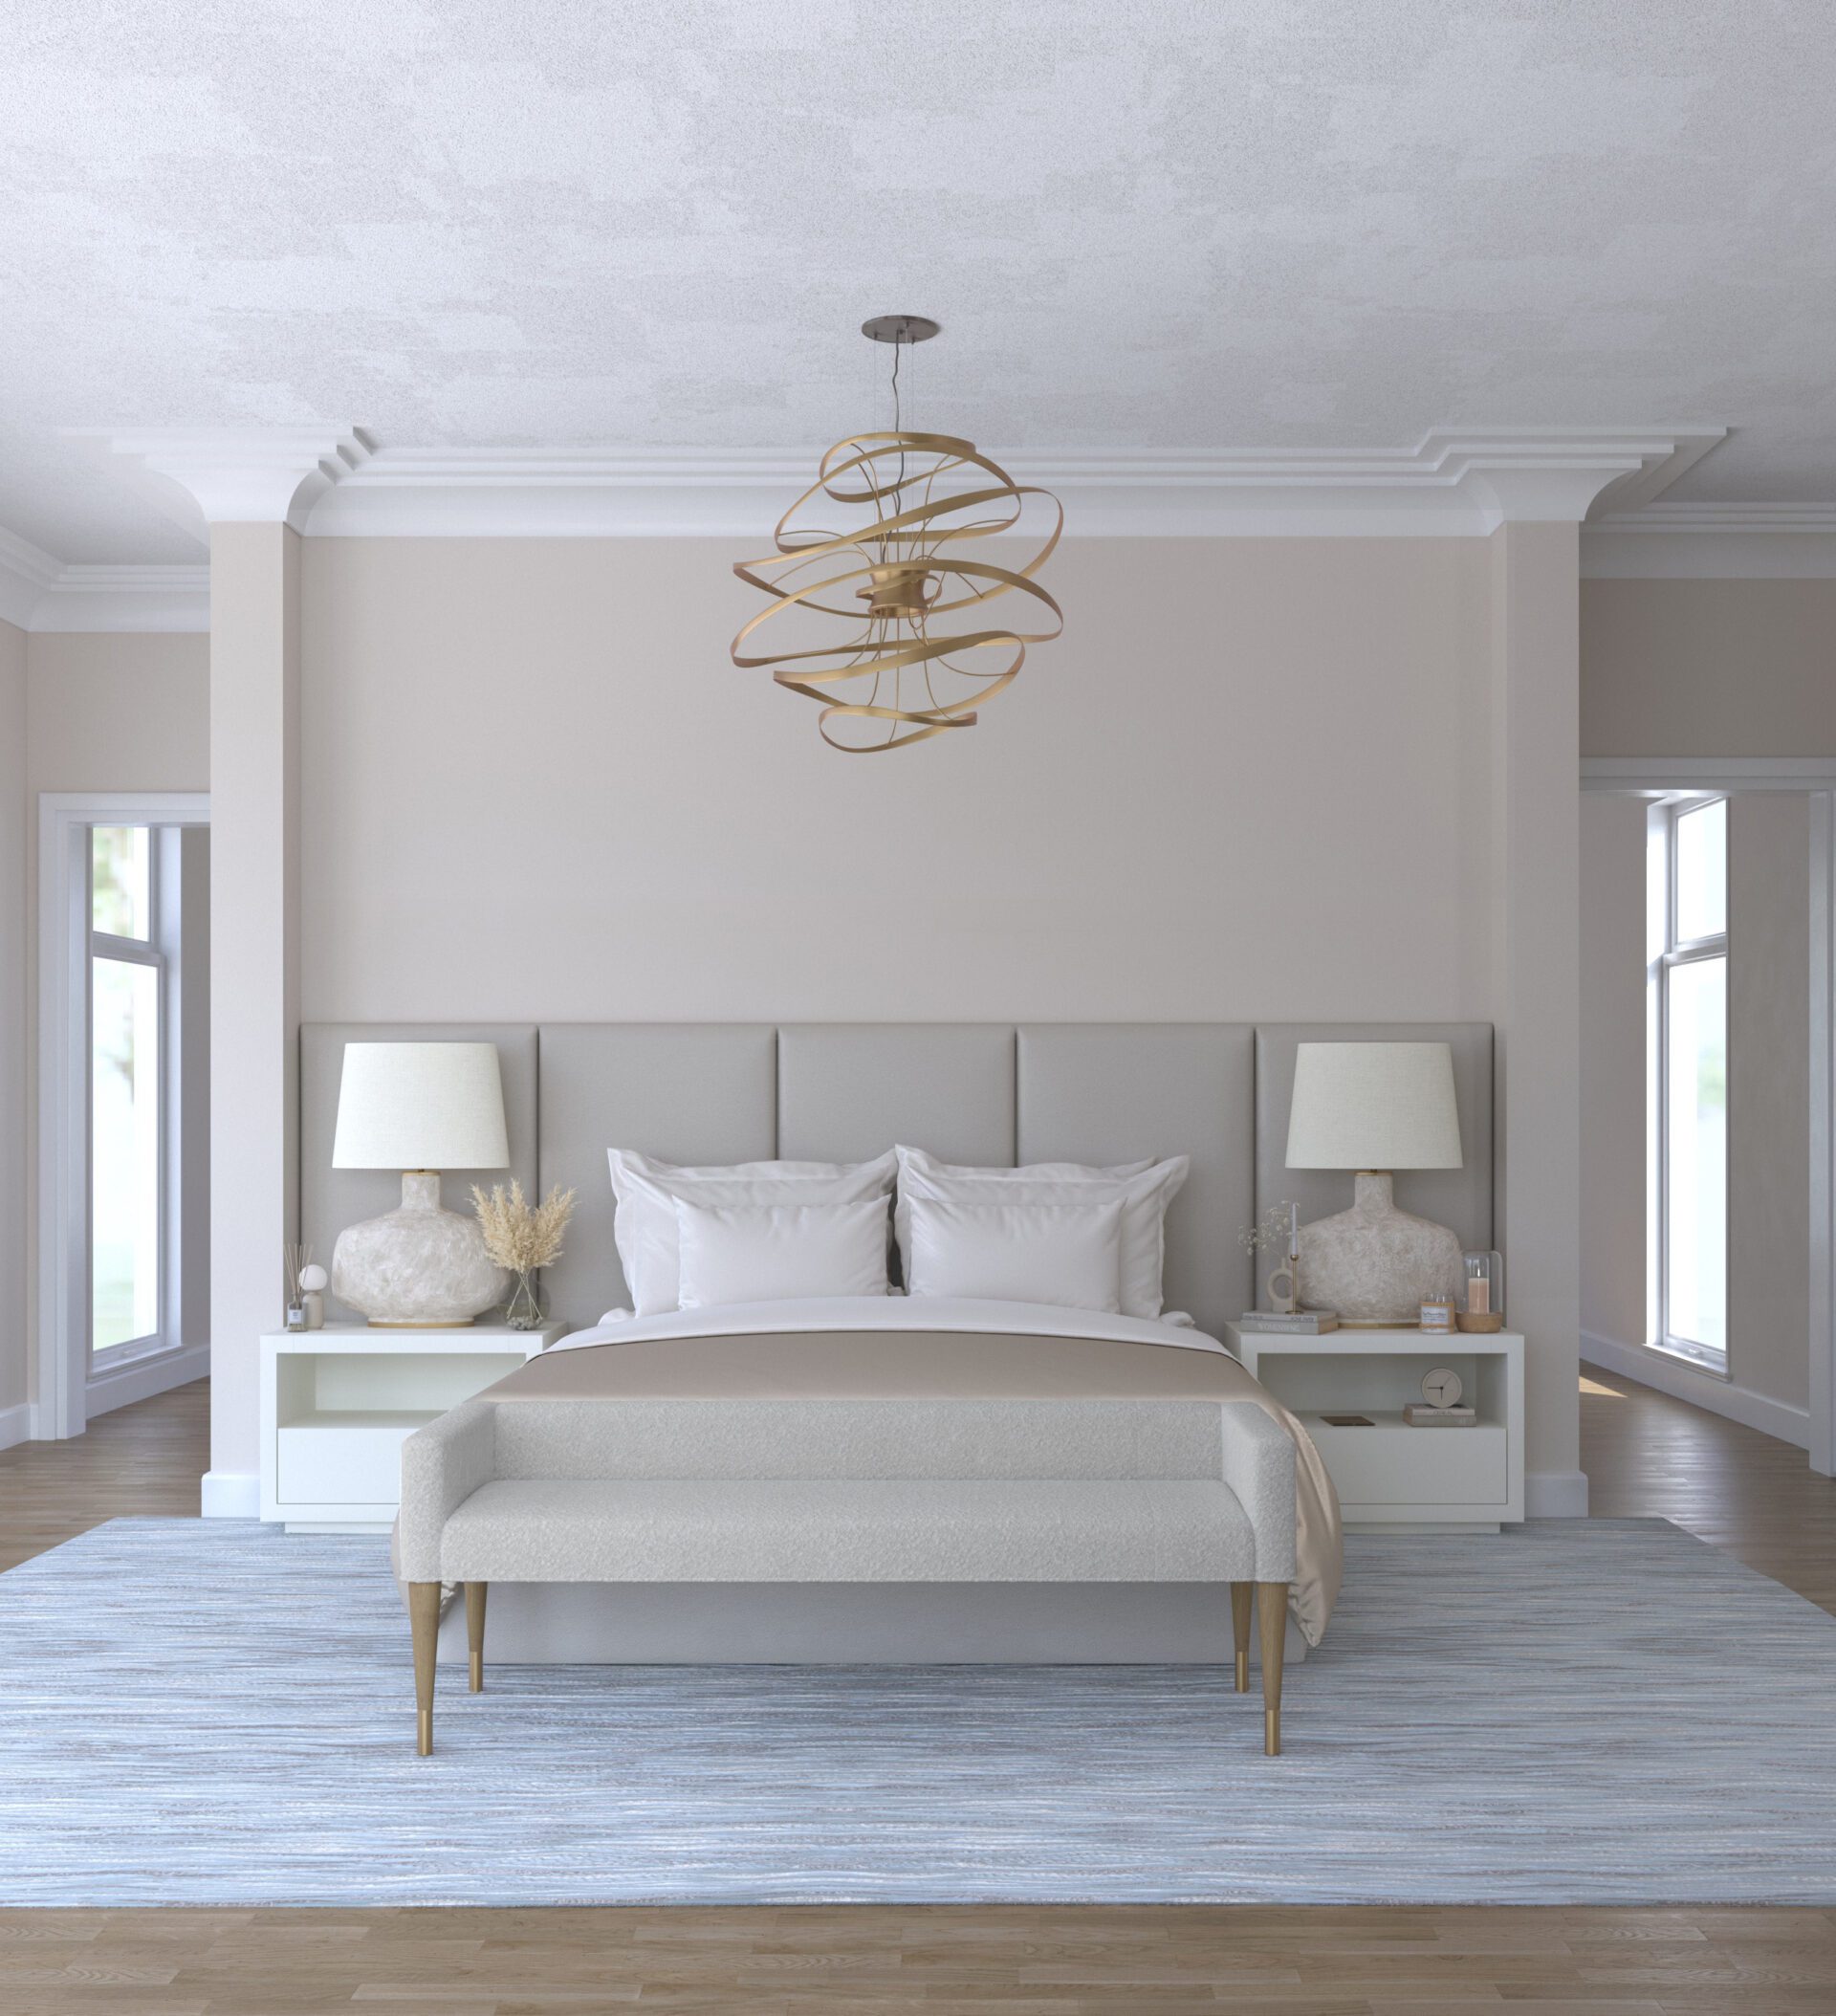 CARLYLE-upholstered-wall-mounted-headboard-bed-luxury-furniture-blend-home-furnishings